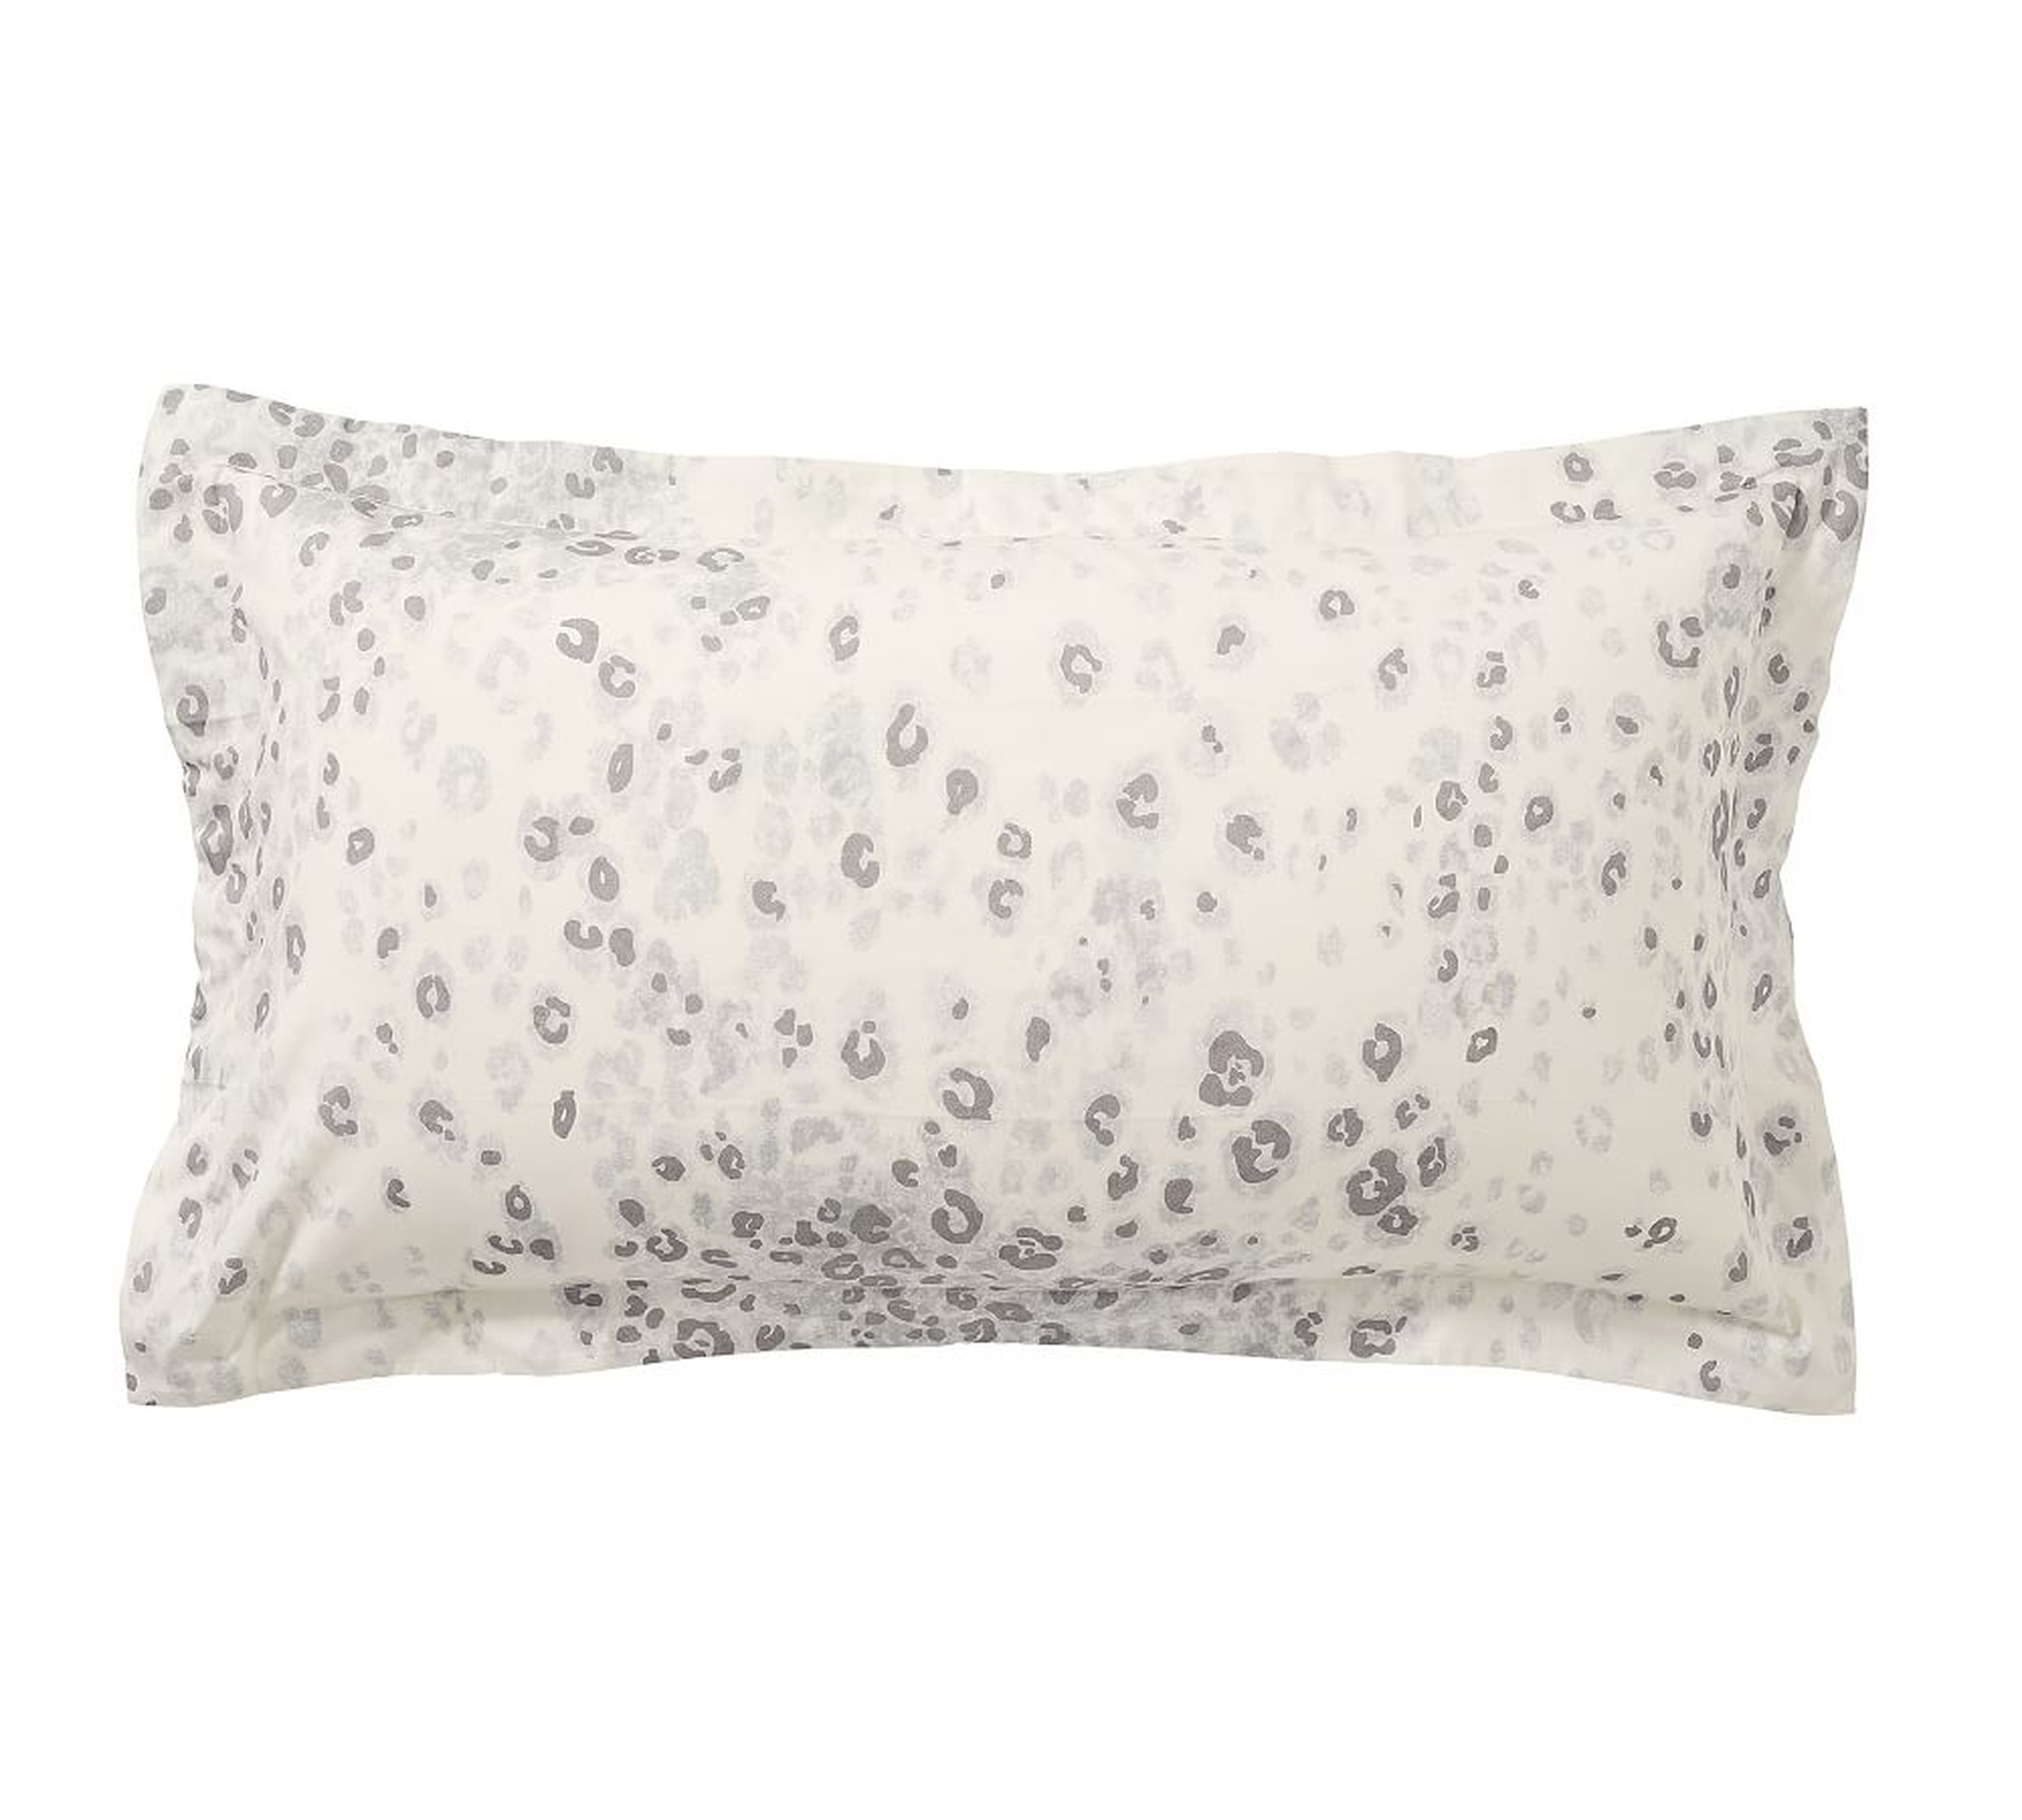 White Snow Leopard Organic Percale Shams, King, Set of 2 - Pottery Barn